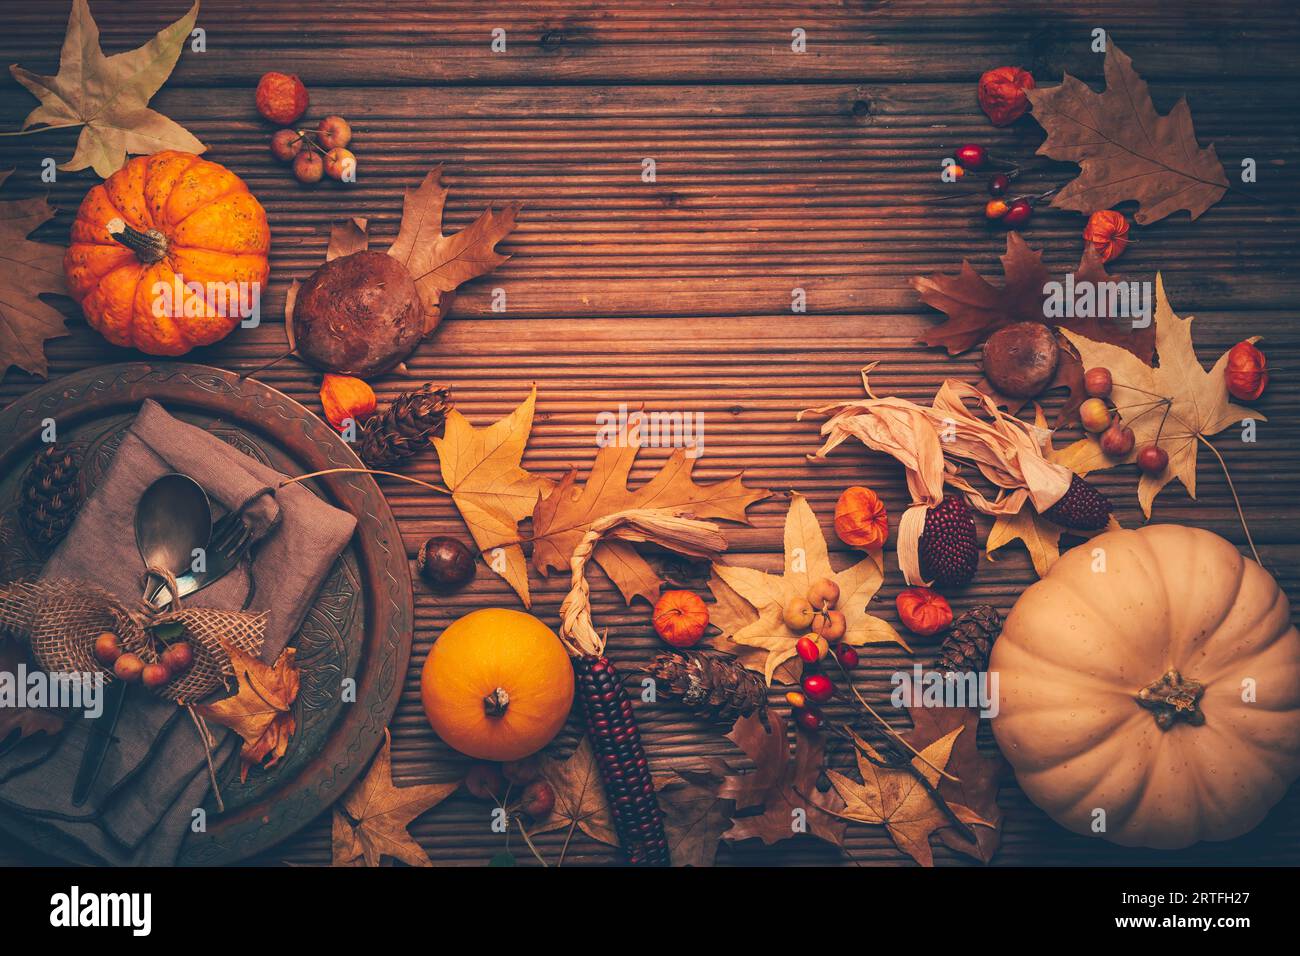 Autumn and Thanksgiving background with pumpkins and autumn leaves, place setting. Stock Photo